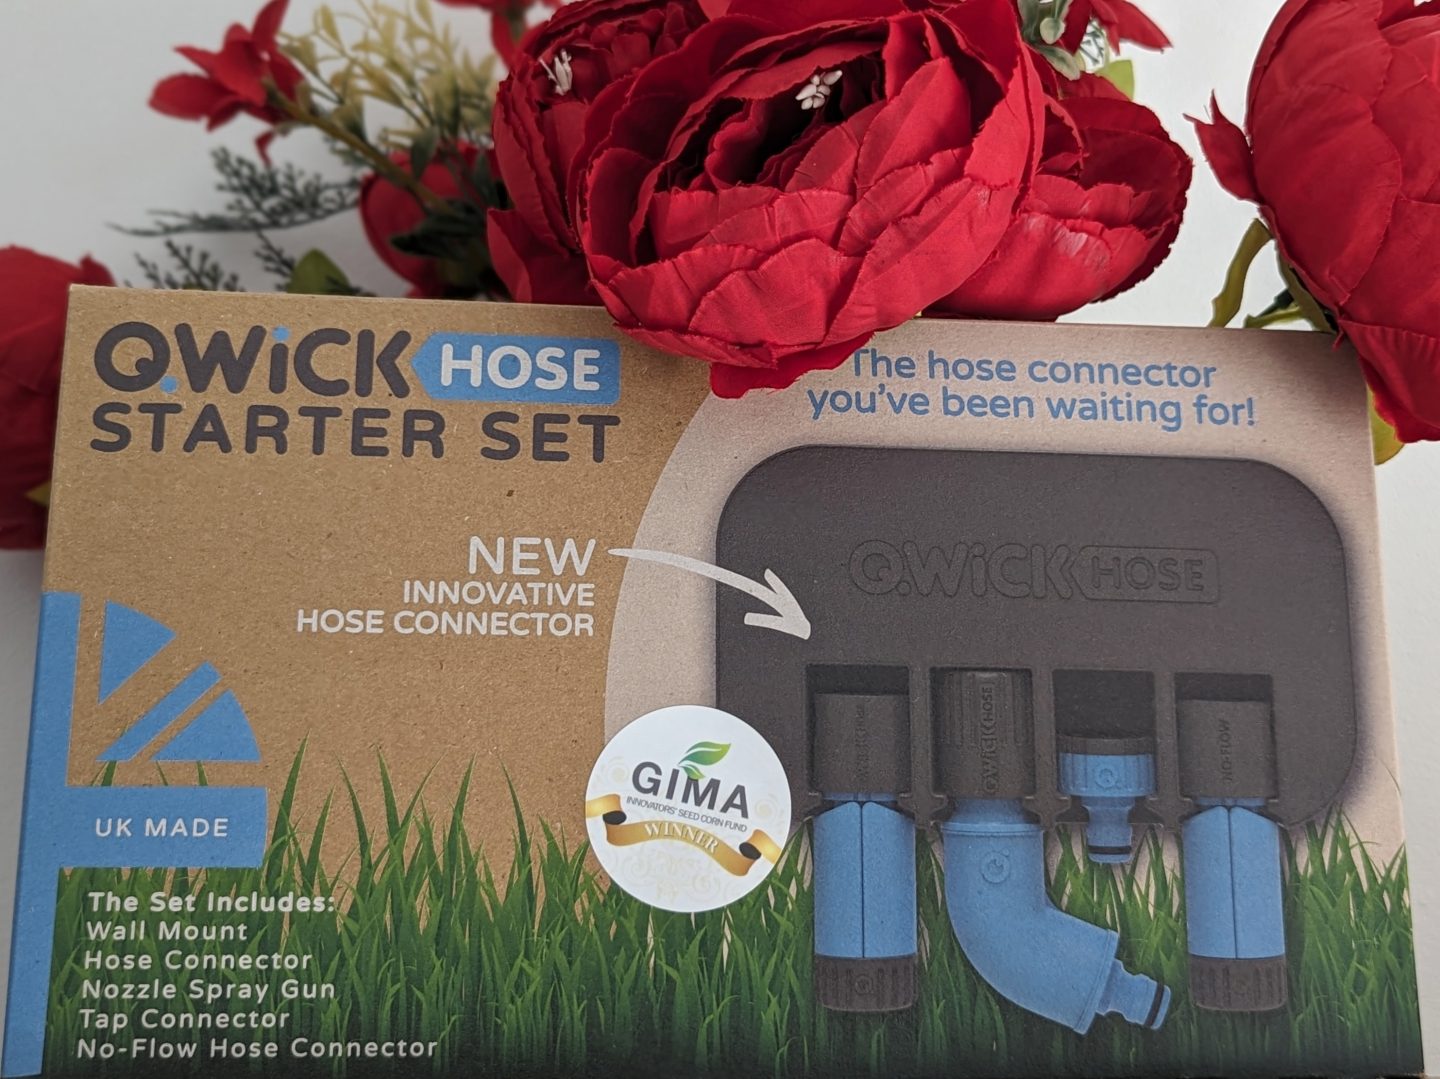 Quick Hose Starter Set in box displayed with red flowers behind